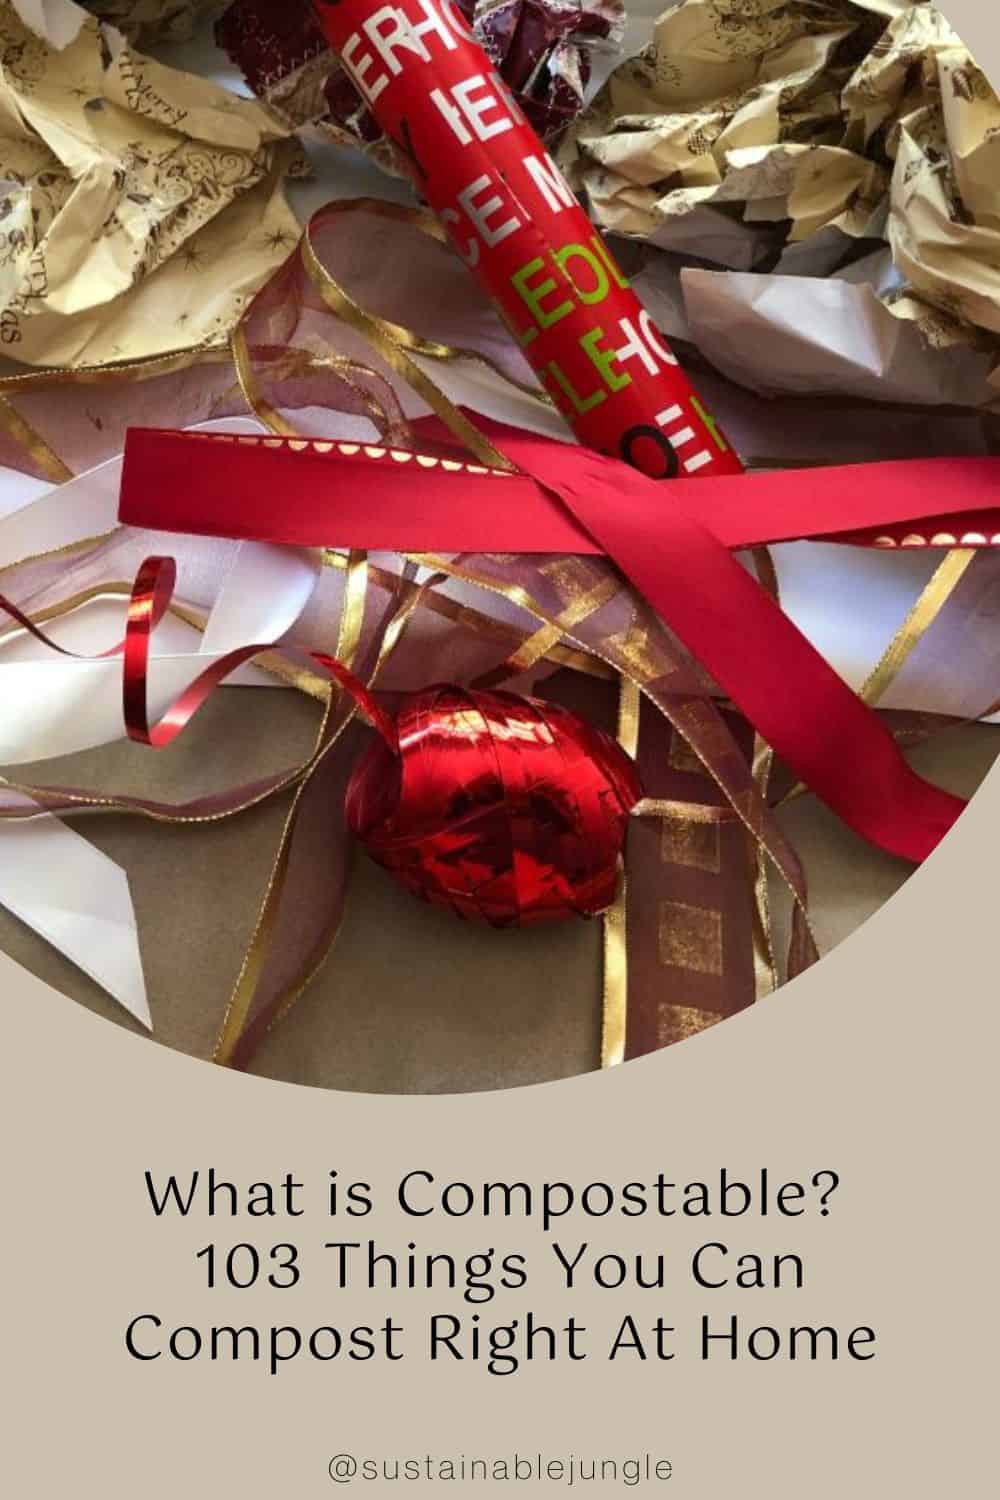 What is Compostable? 103 Things You Can Compost Right At Home Image by DLMcK #whatiscompostable #thingsthatareocompostable #whattocompostlist #compostablewaste #compostablematerials #listofcompostableitems #sustainablejungle